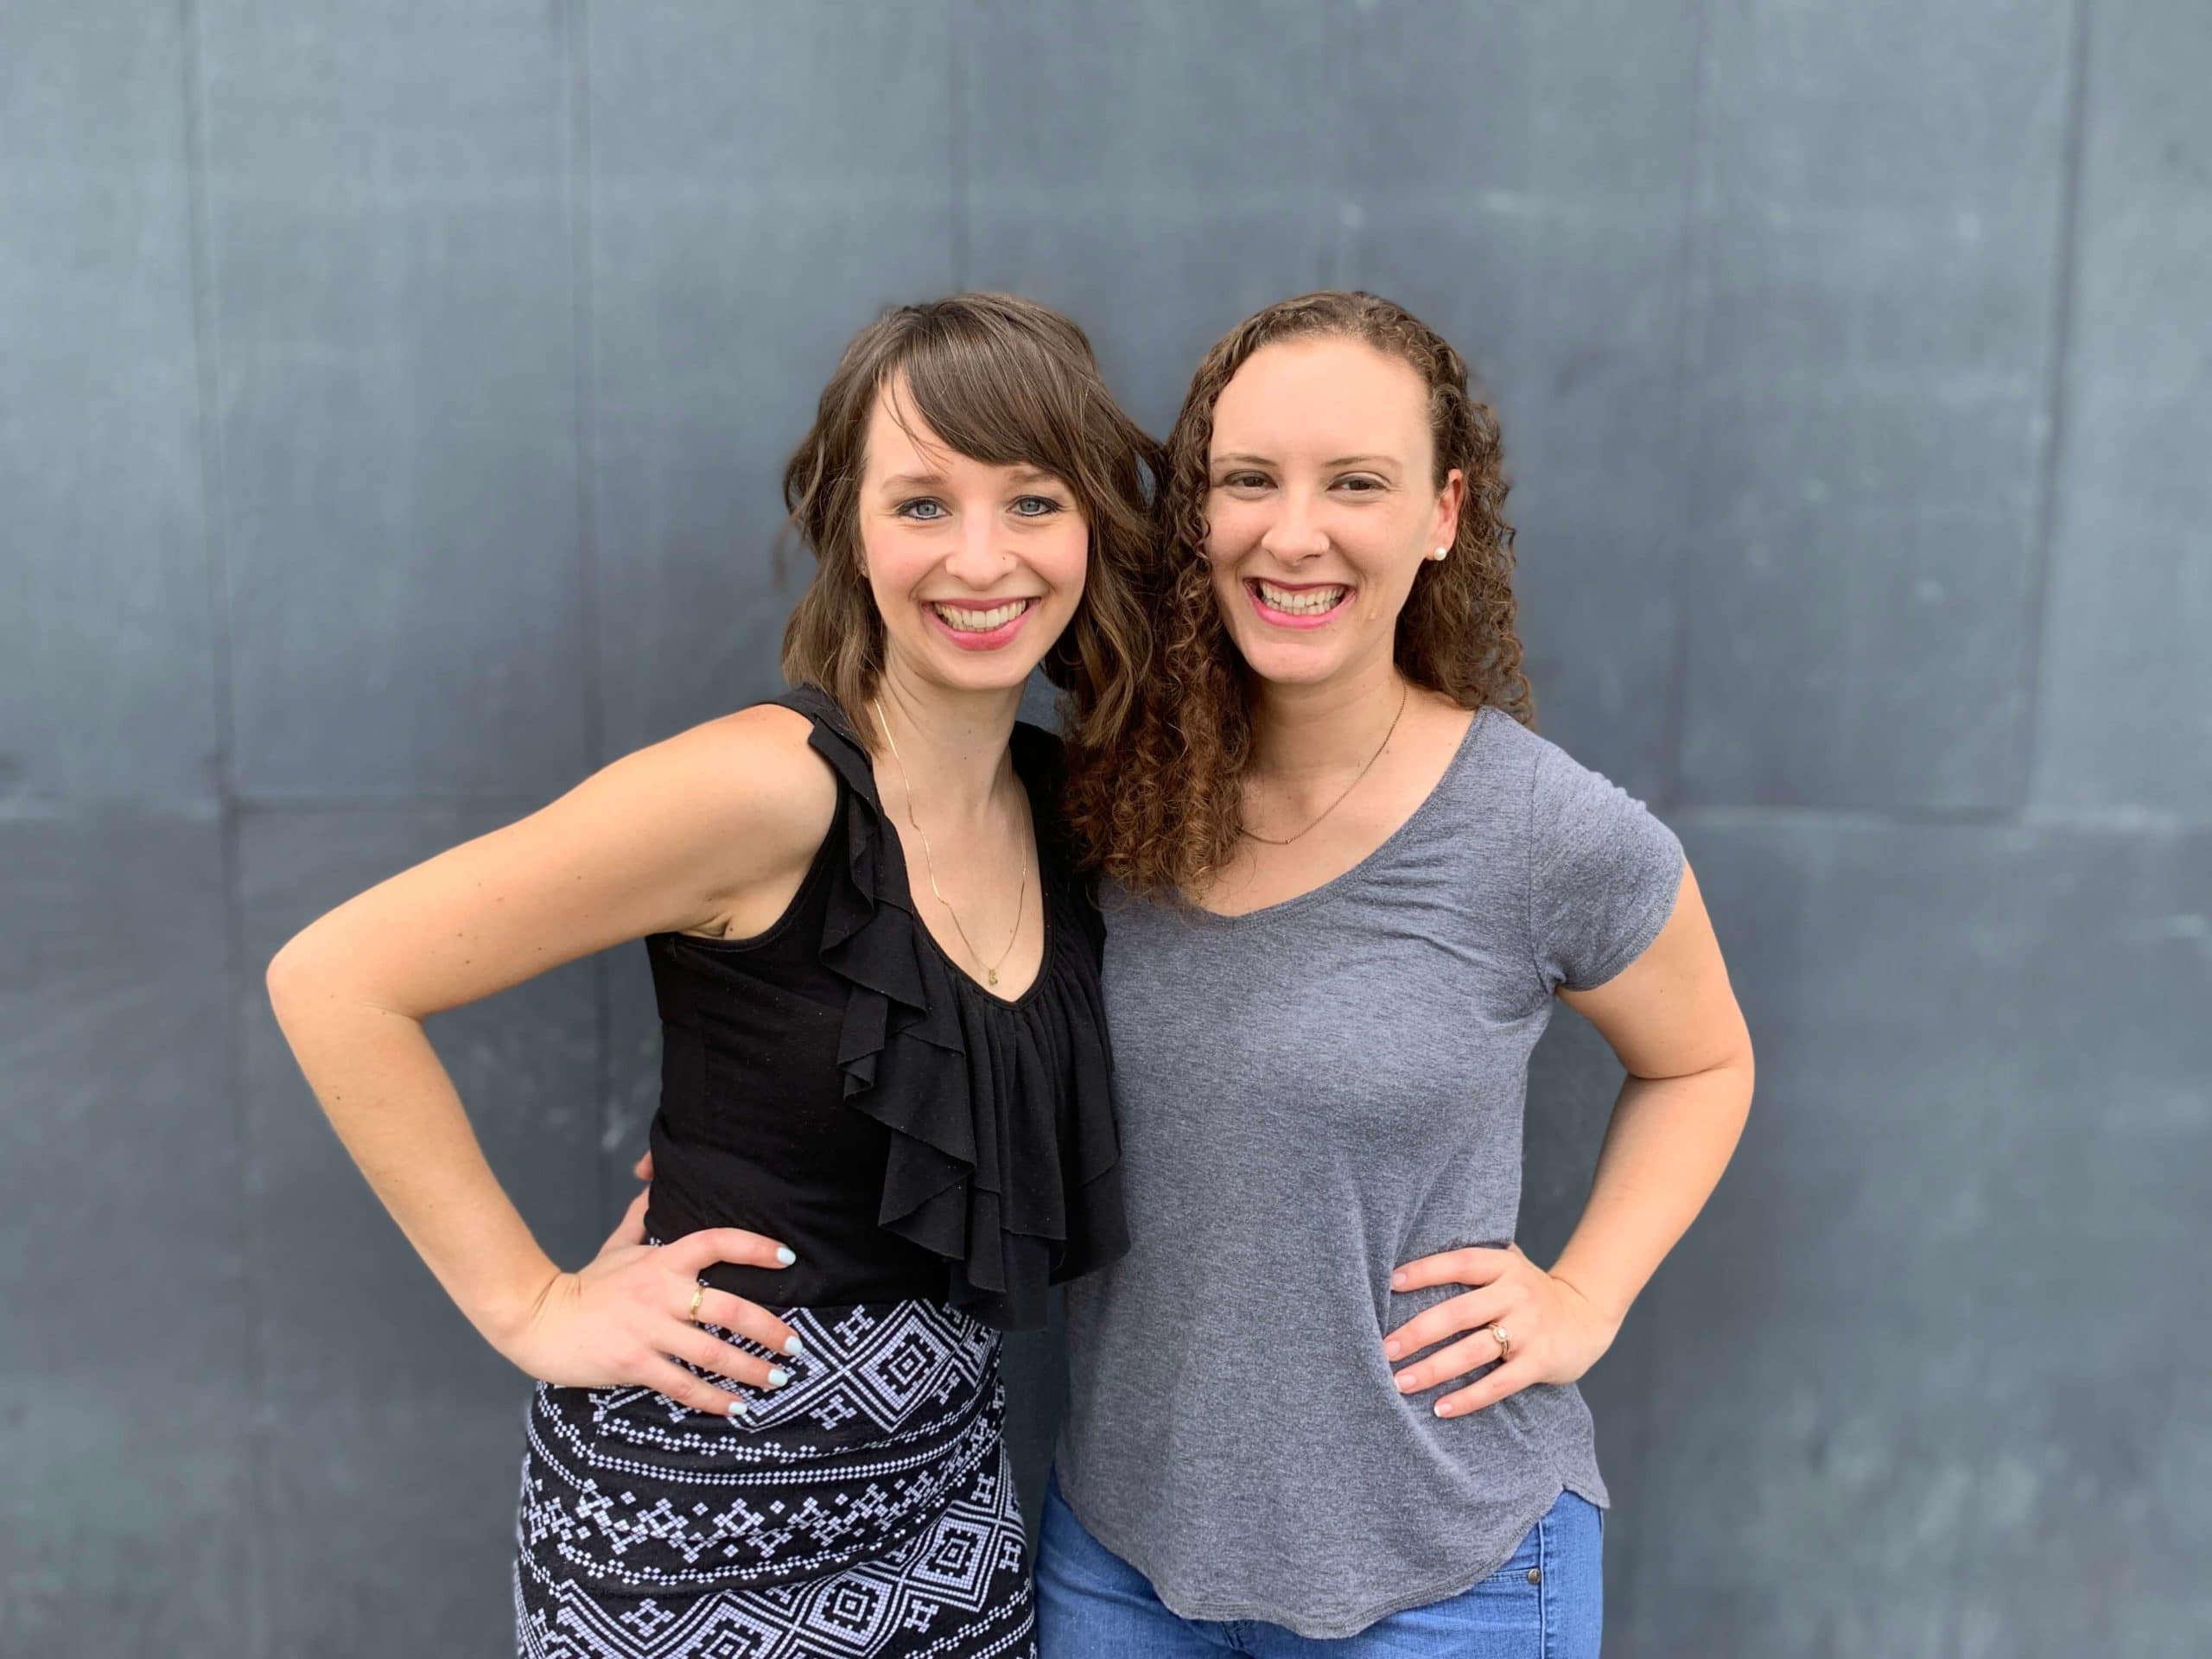 Jen Smith and Jill Sirianni from Frugal Friends Podcast